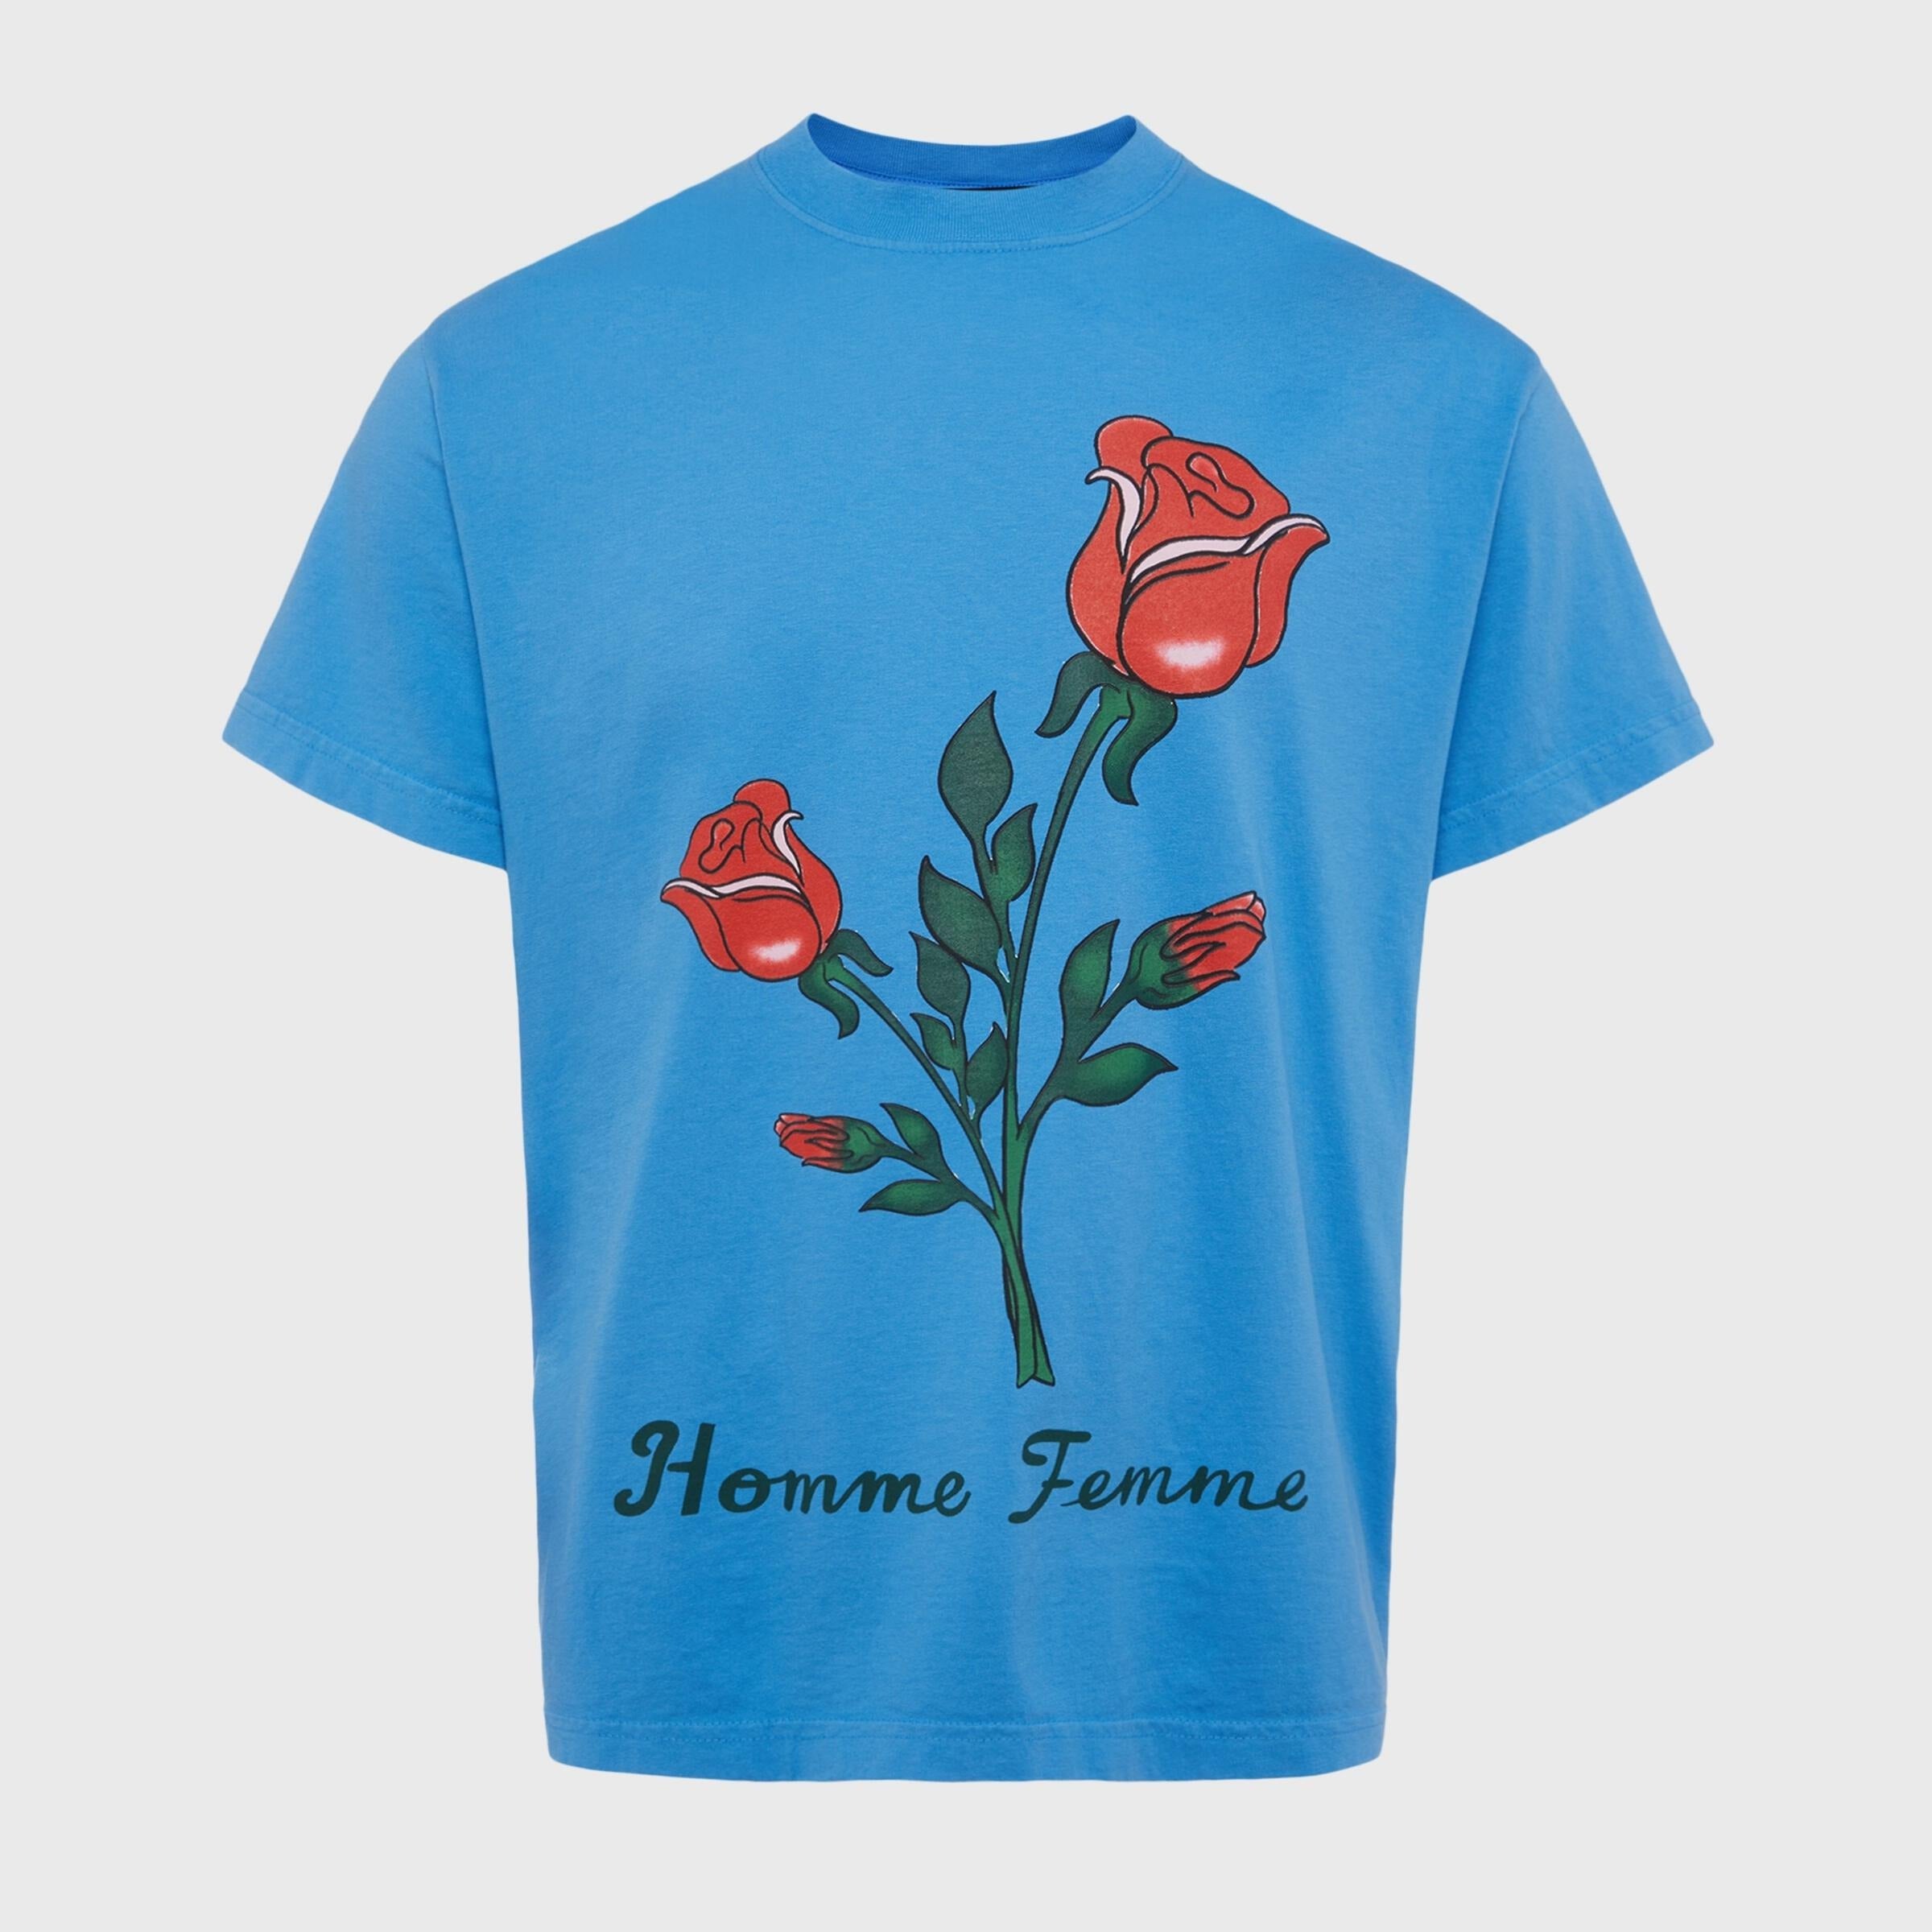 Homme + Femme Tee Shirt - Poetry